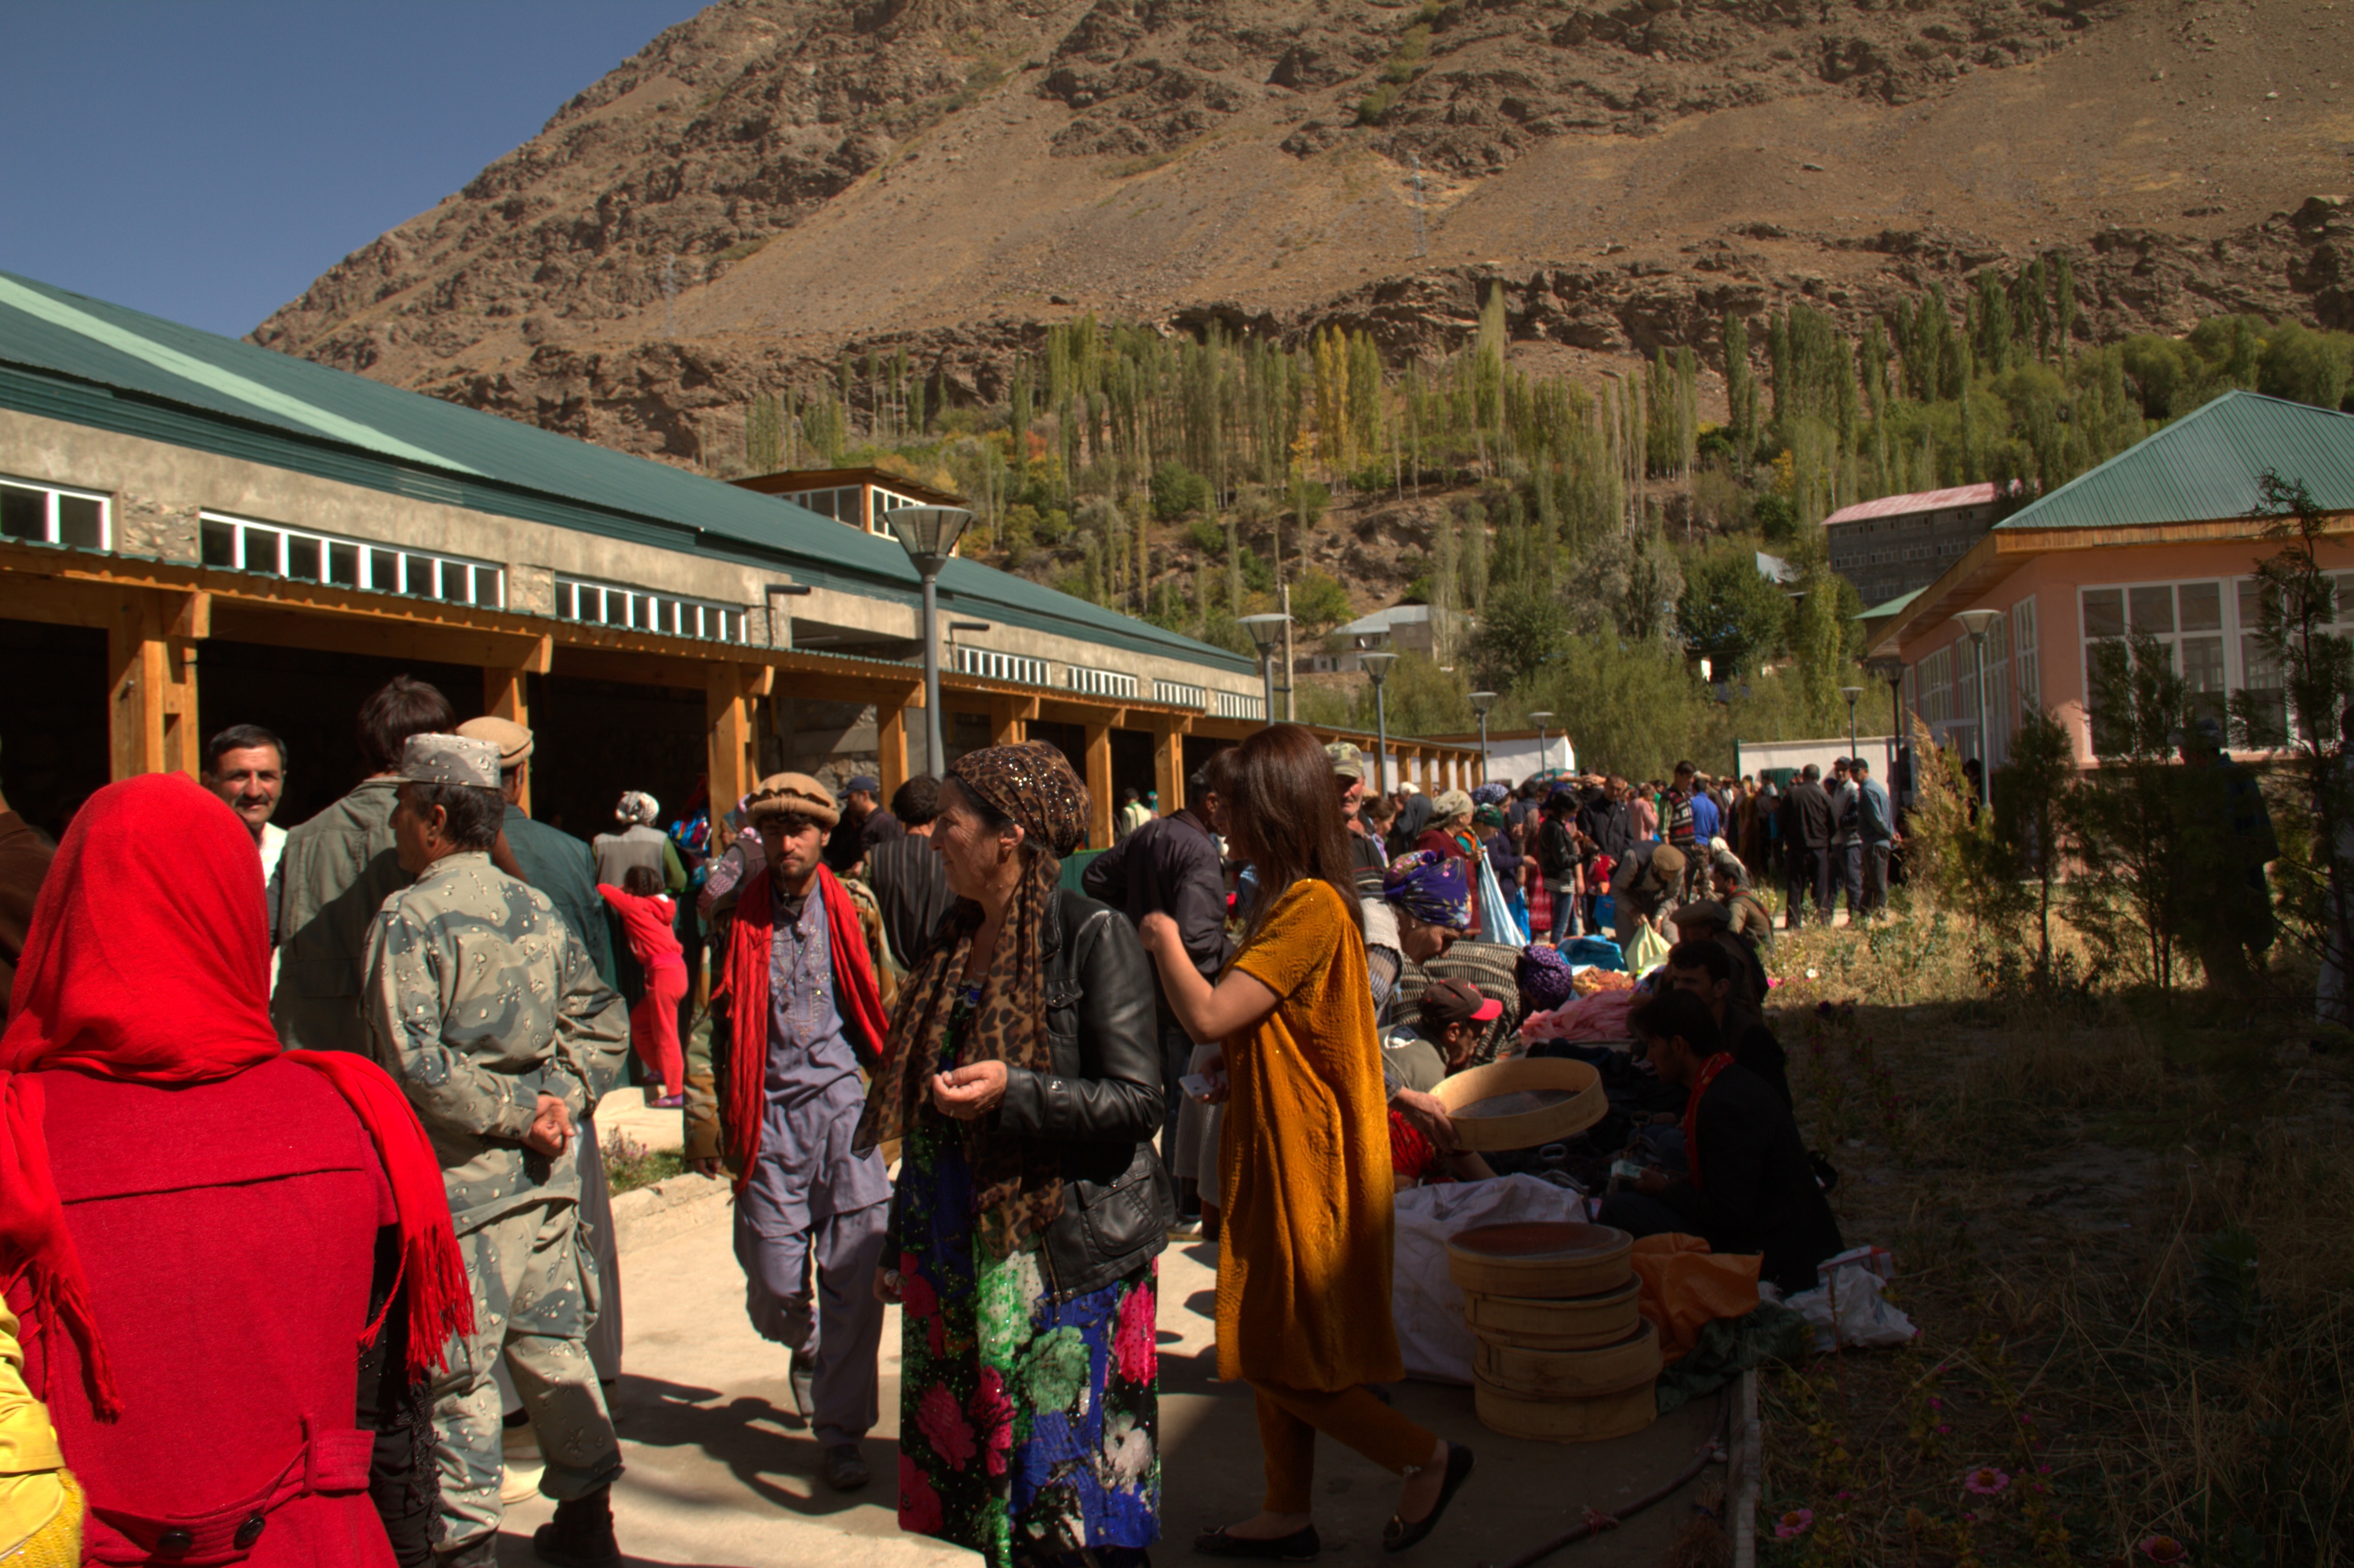 The crossborder market outside of Khorog, Tajikistan, in the village of Tem, is a cultural and economic hub. Once a week, buyers, sellers, and traders from all parts of Northern Afghanistan are allowed to cross the bridge to Tajikistan and sell traditional handicrafts, produce and other goods. The region around the Panj River is called Badakhshan, which has historically shared the same dialect, culture, and customs. Many people have family on both sides of the river, in Afghanistan and Tajikistan. (Photo: Dilafruz Khonikboyeva/AKDN)